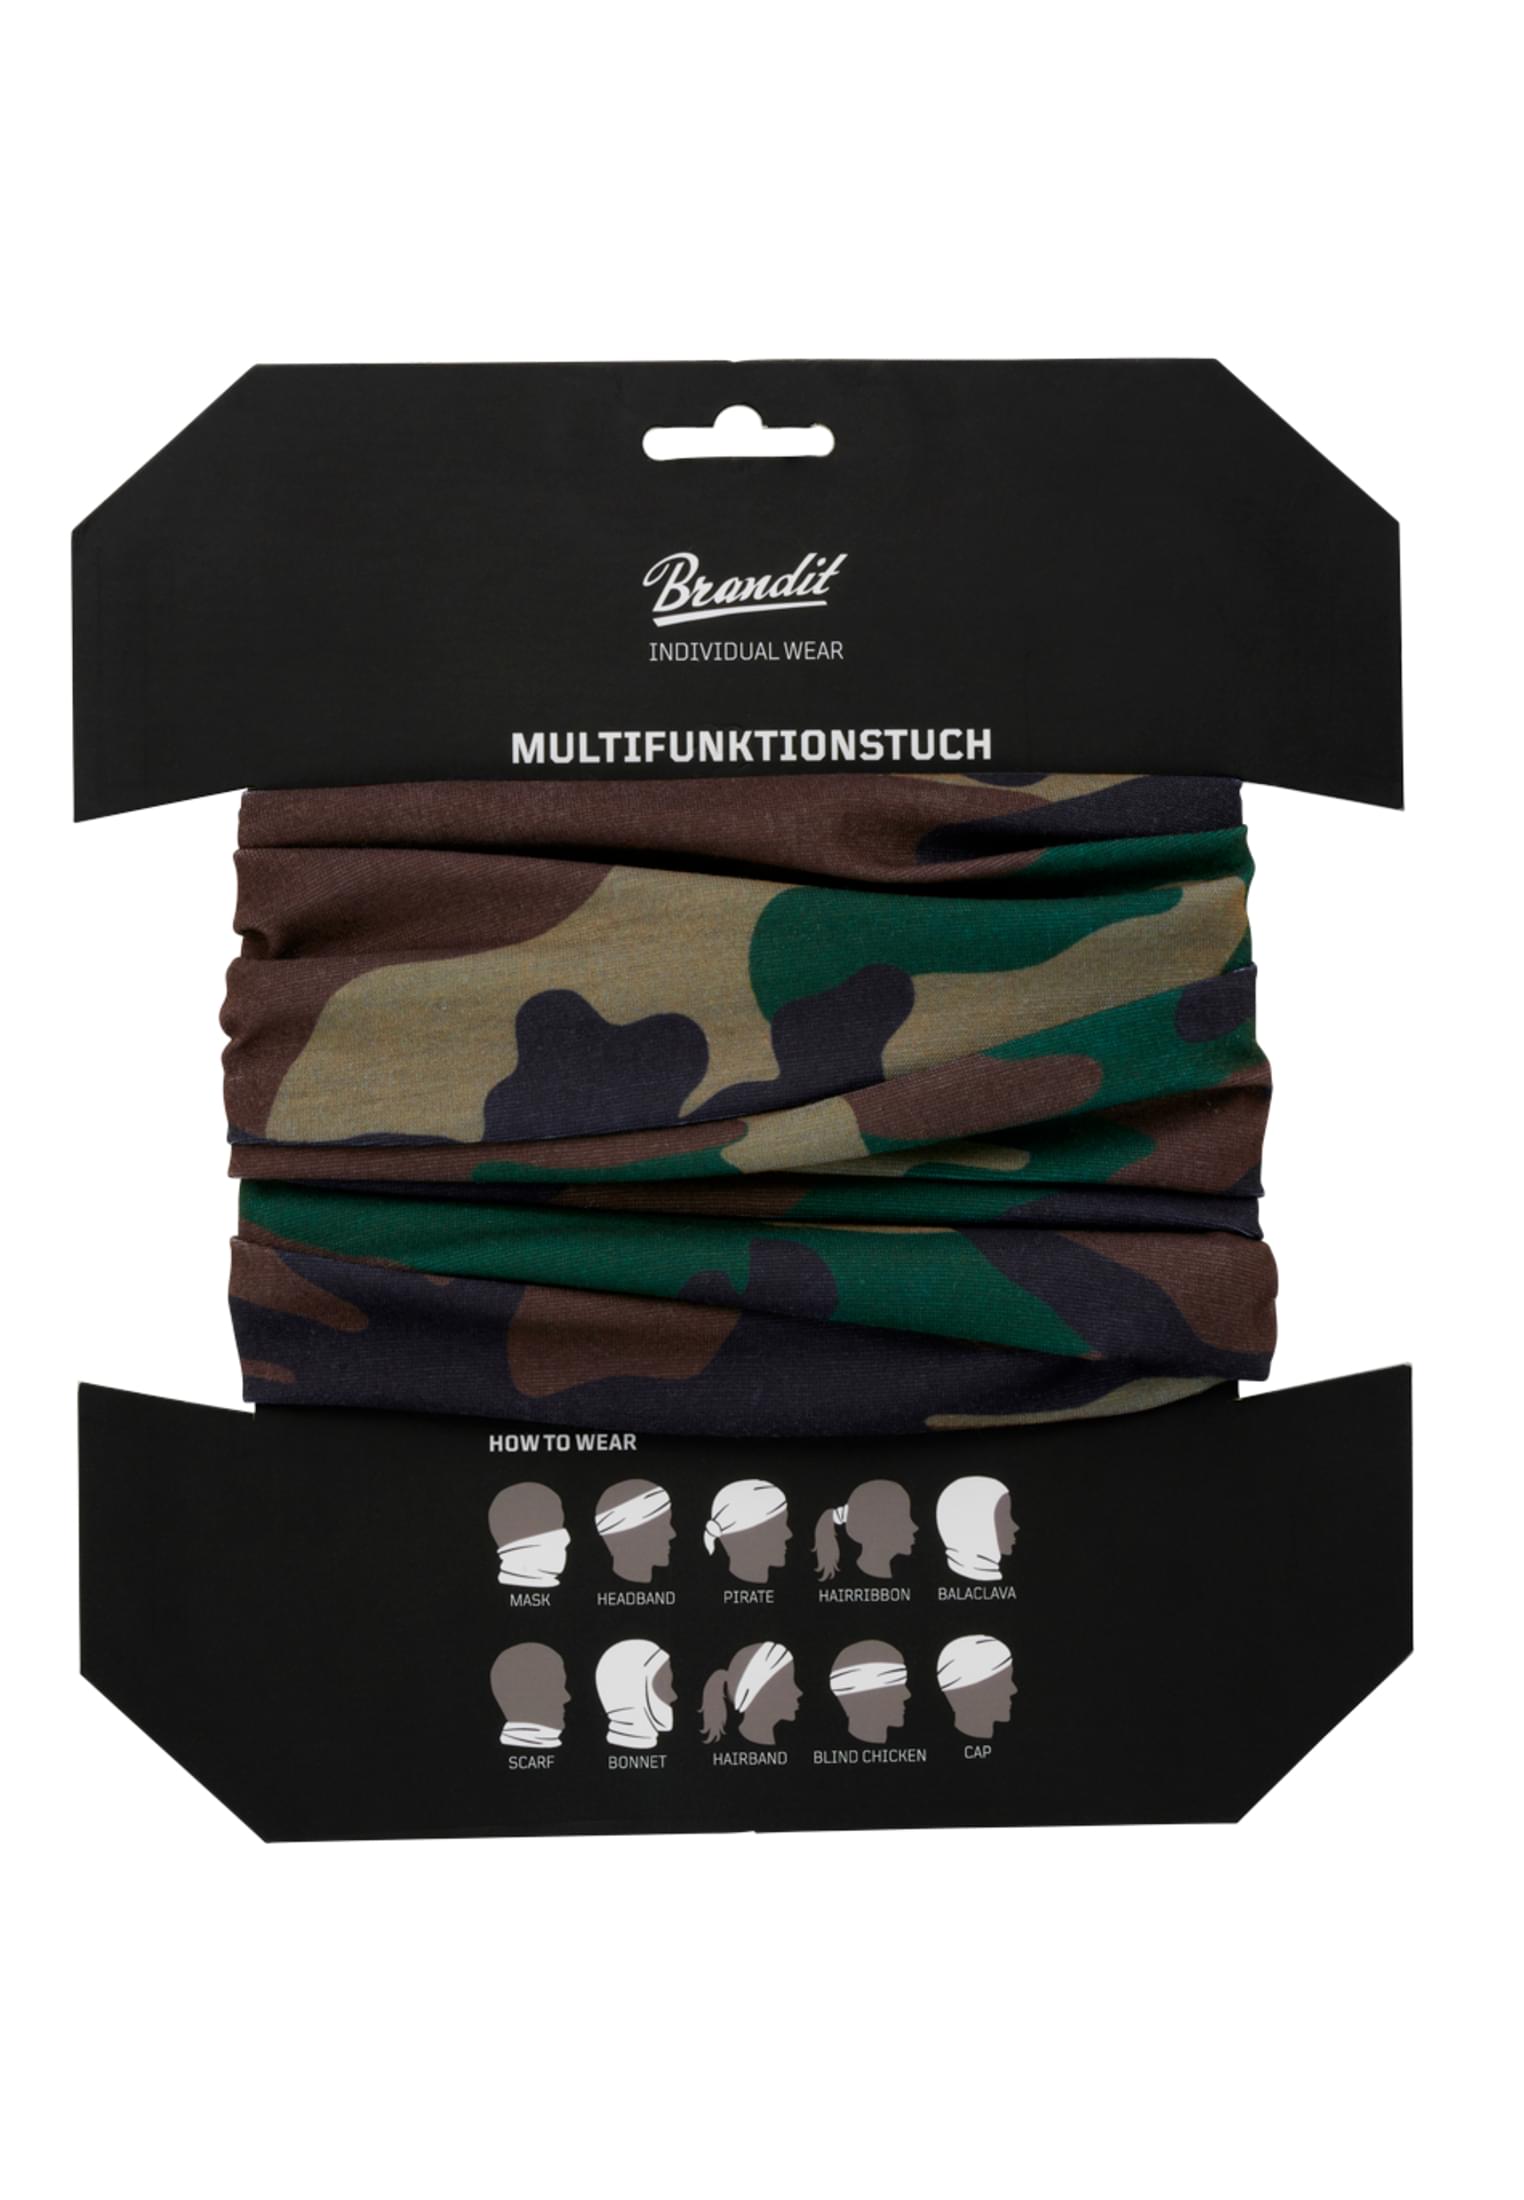 Accessoires Multifunktionstuch in Farbe woodland